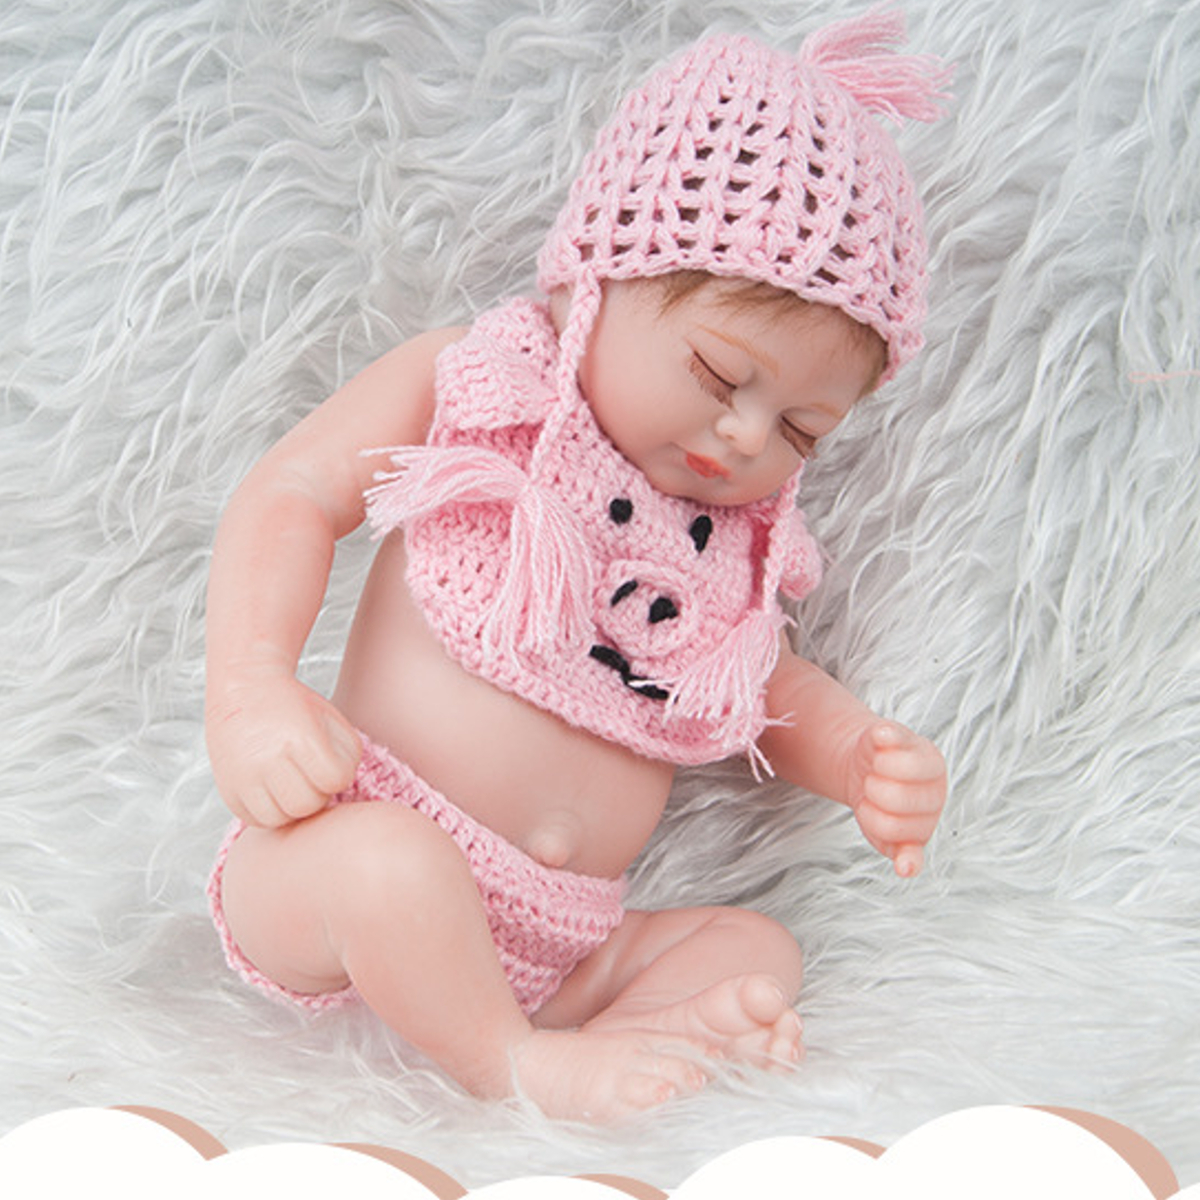 28CM-Soft-Silicone-Vinyl-Realistic-Sleeping-Reborn-Lifelike-Newborn-Baby-Doll-Toy-with-Moveable-Head-1731373-4